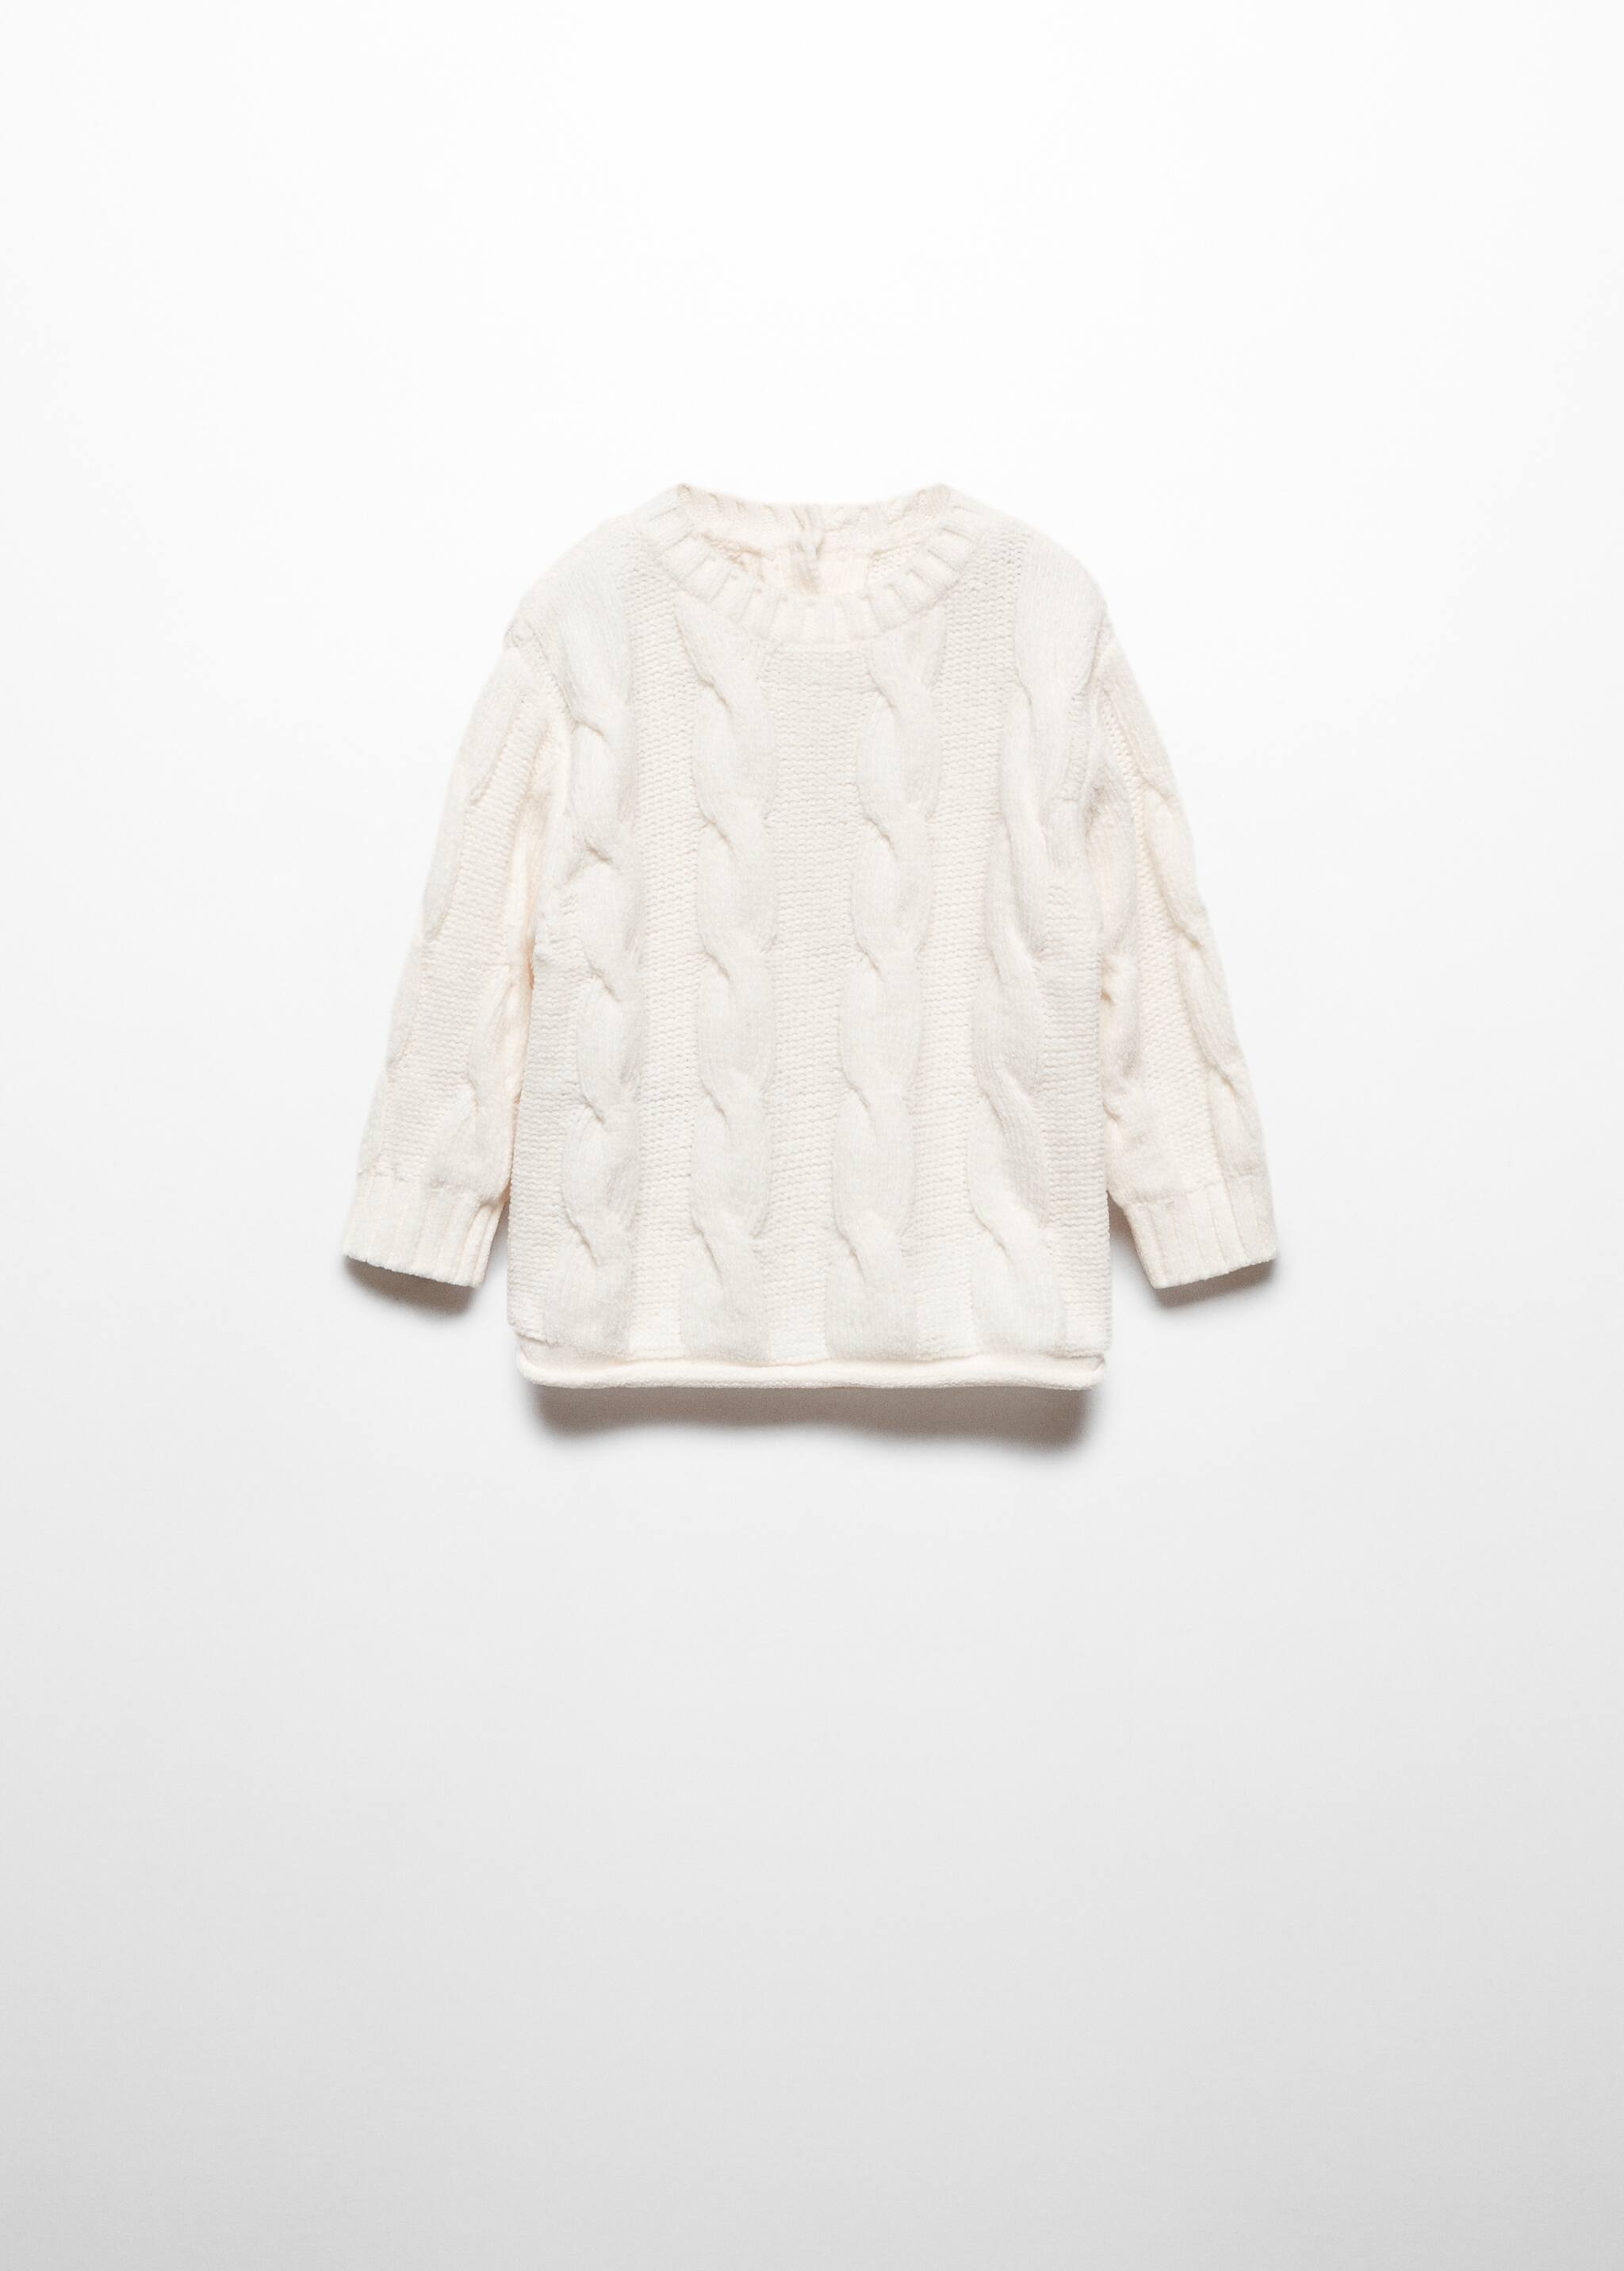 Chenille knit sweater - Article without model